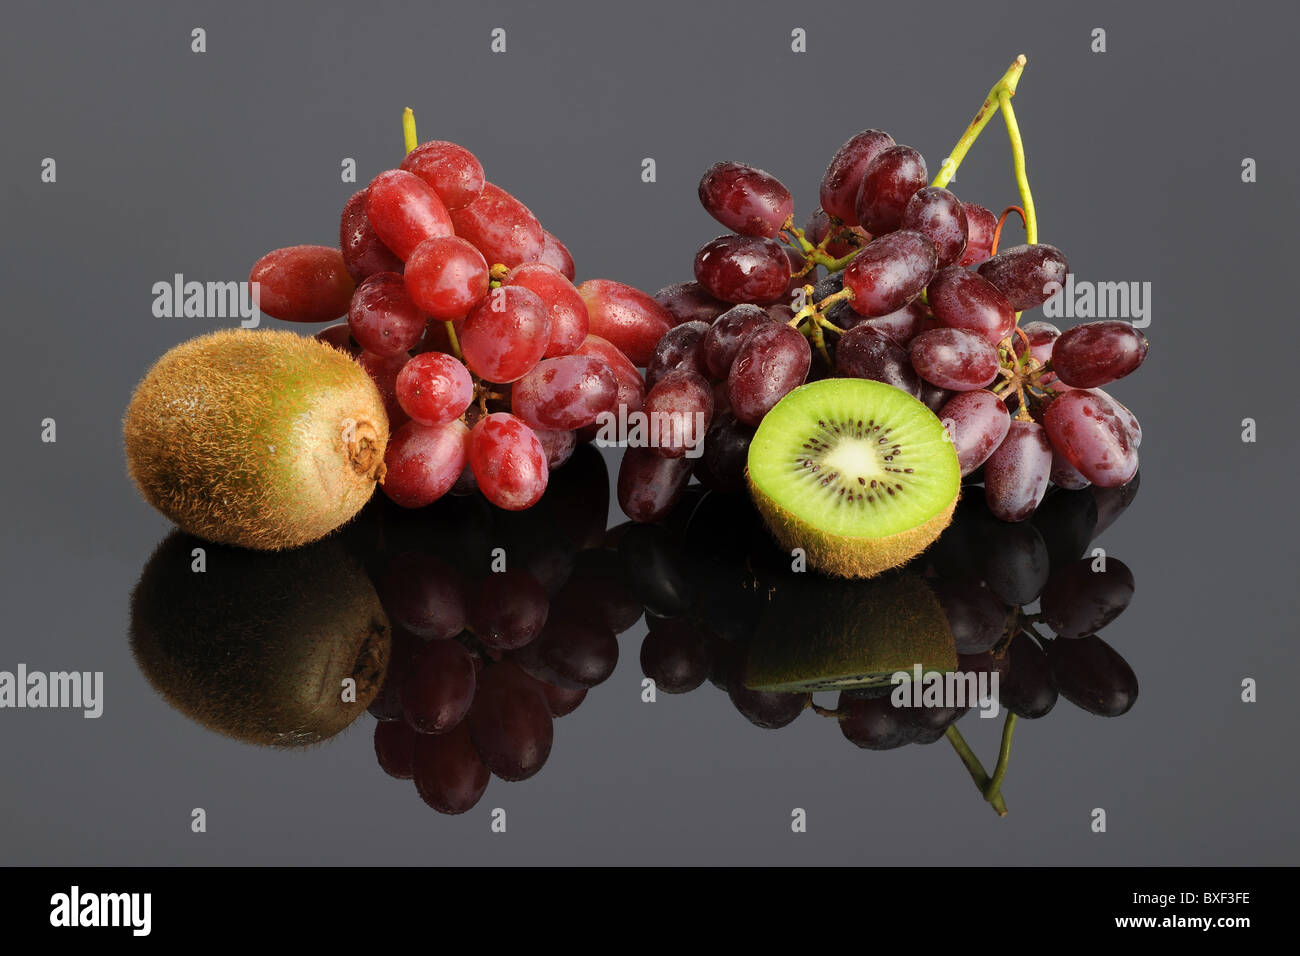 Red grapes and kiwi fruit over reflective table Stock Photo